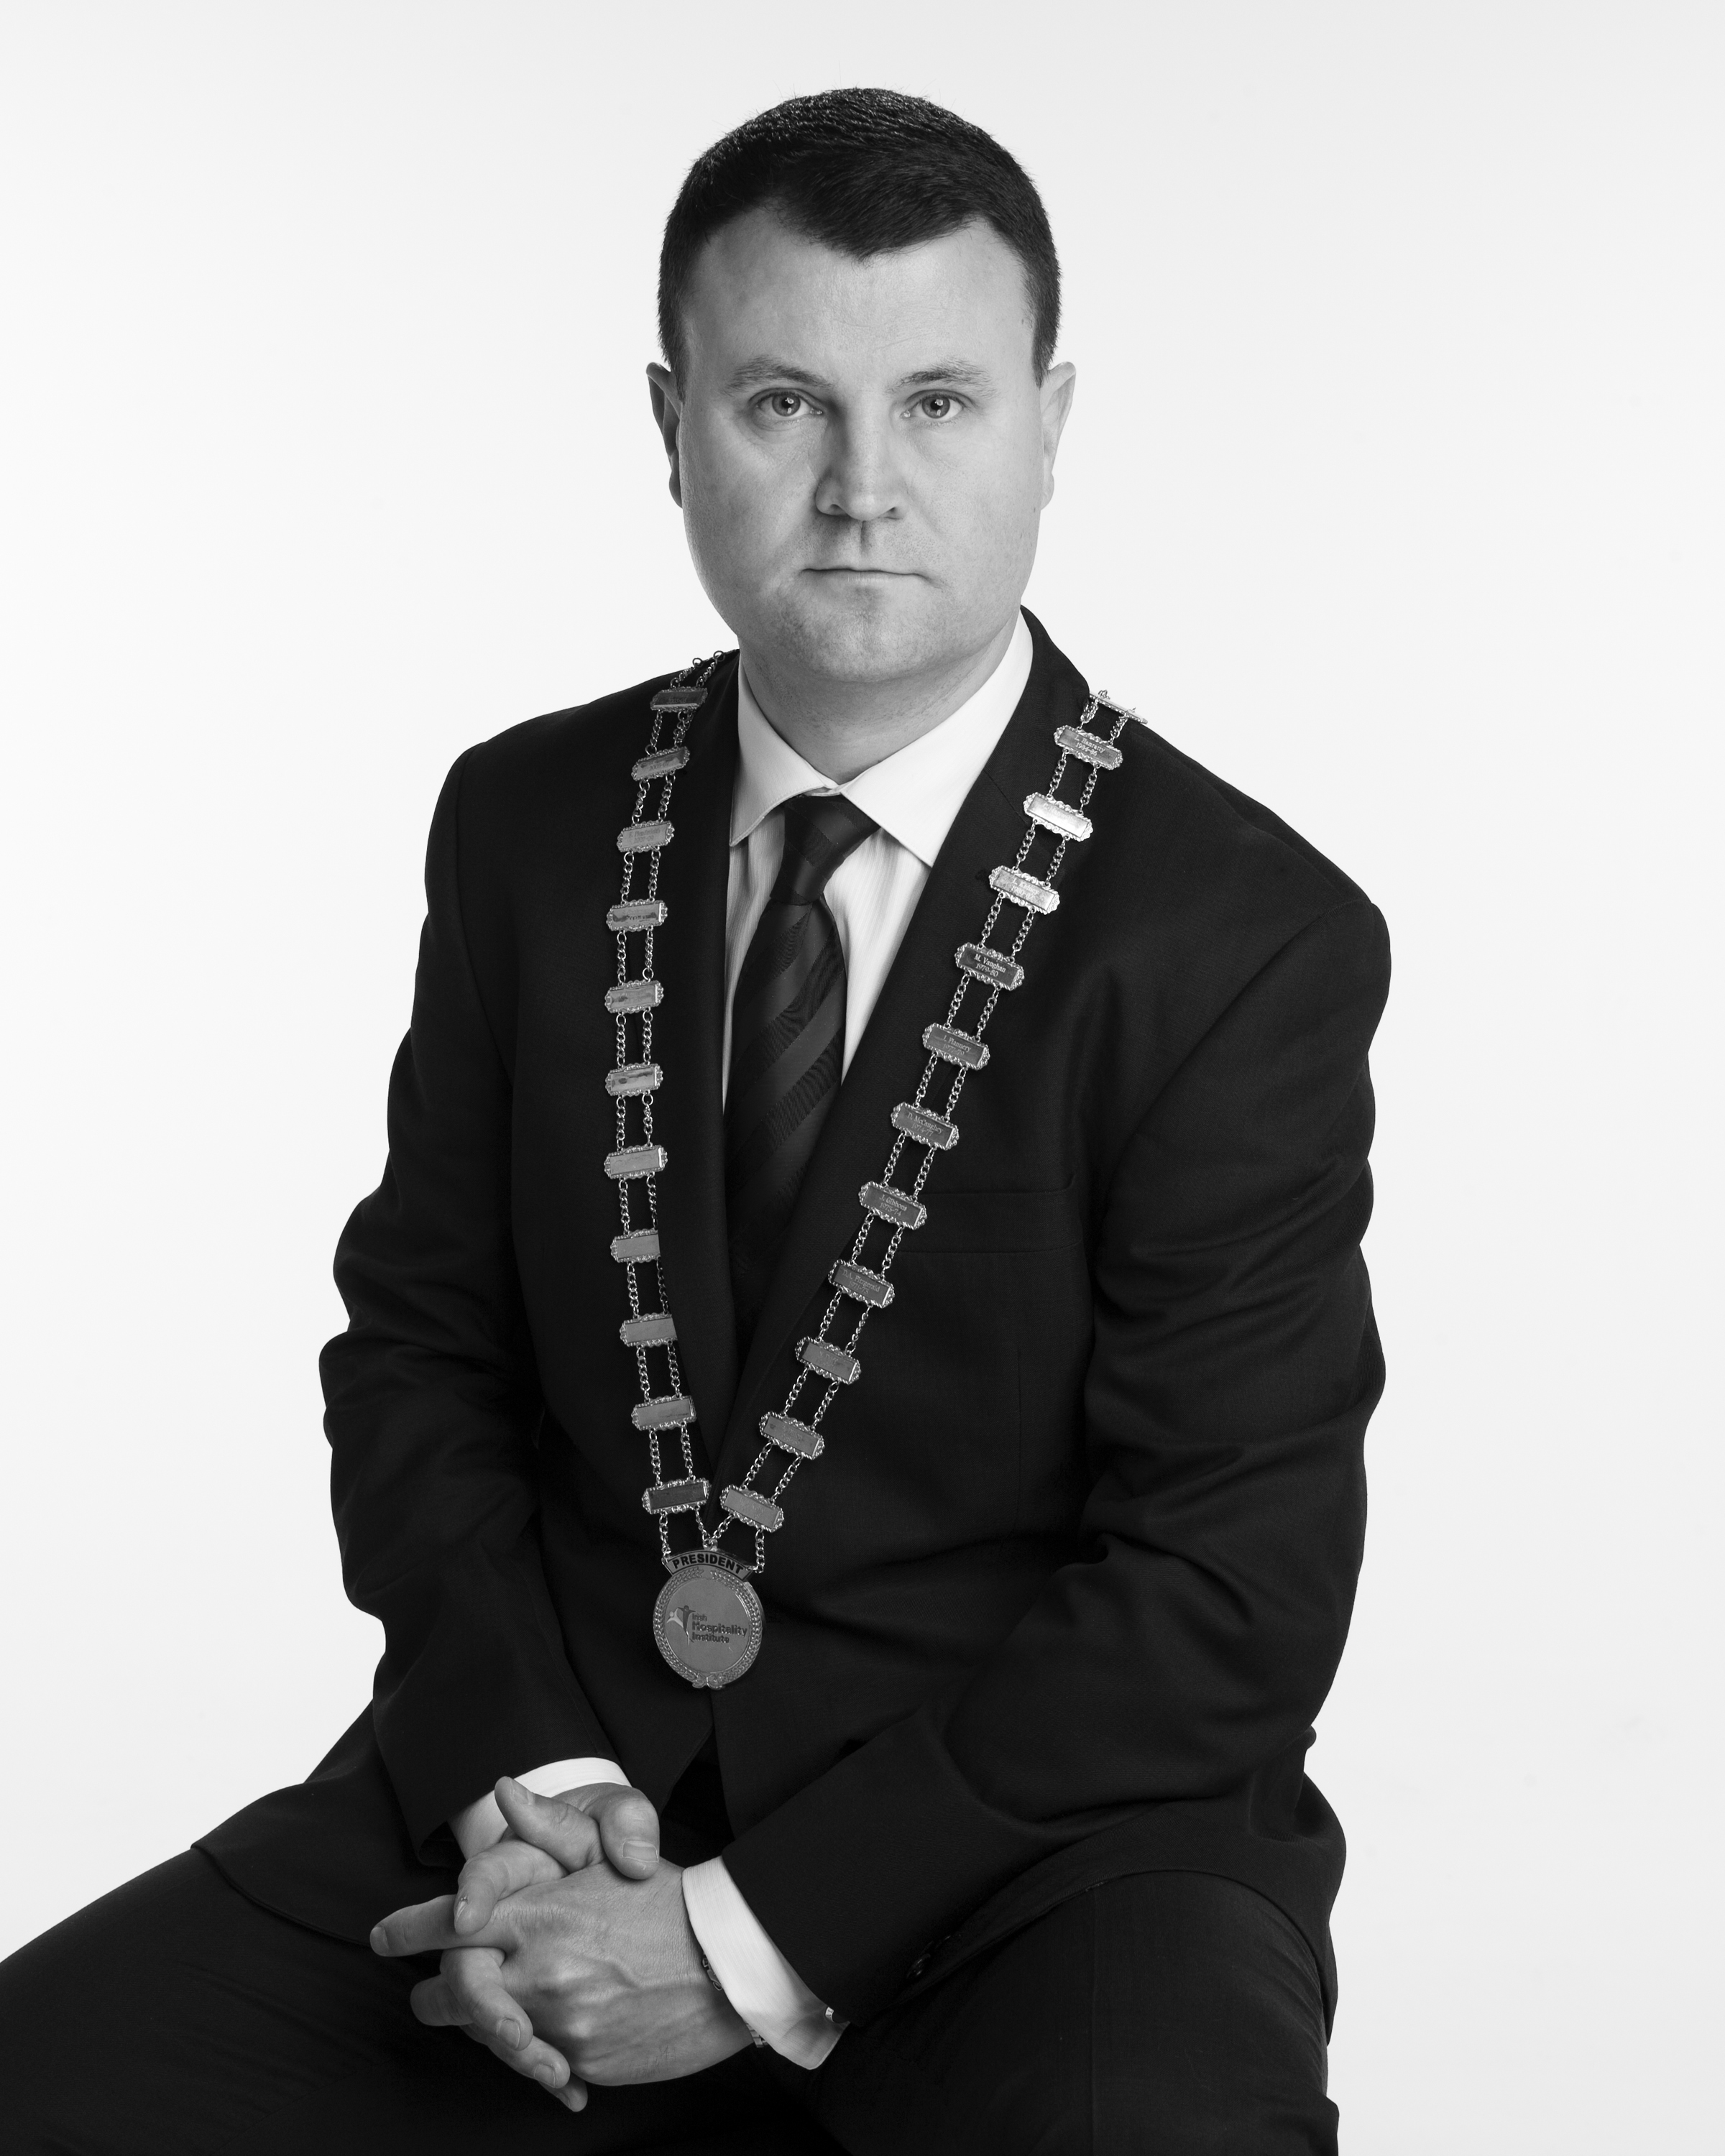 Nicky Logue (1995) is appointed President of IHI